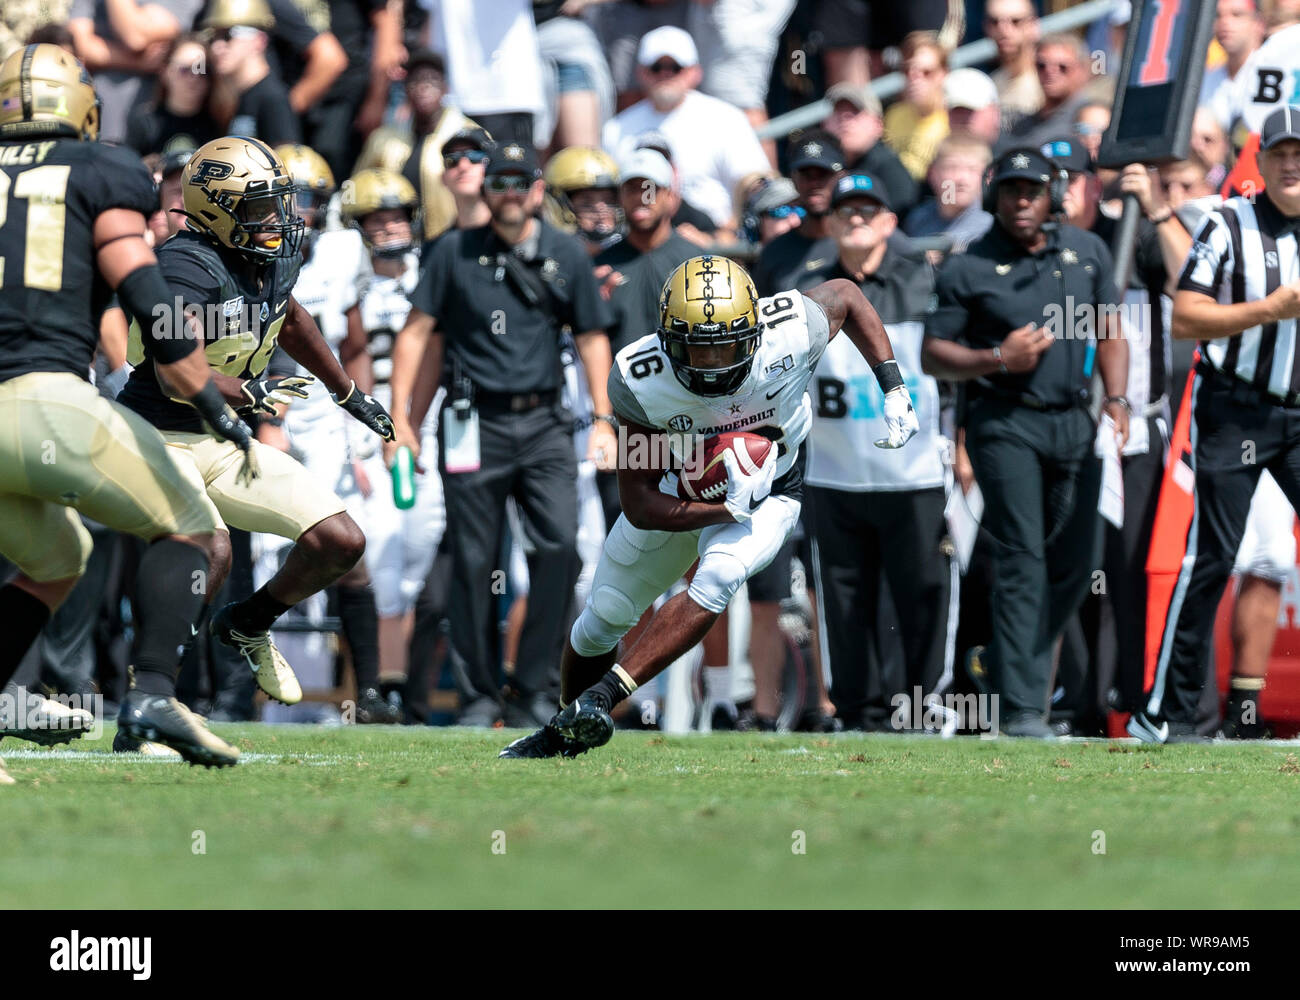 West Lafayette, Indiana, USA. 07th Sep, 2019. Vanderbilt wide receiver Kalija Lipscomb (16) runs with the ball after the catch during NCAA football game action between the Vanderbilt Commodores and the Purdue Boilermakers at Ross-Ade Stadium in West Lafayette, Indiana. Purdue defeated Vanderbilt 42-24. John Mersits/CSM/Alamy Live News Stock Photo